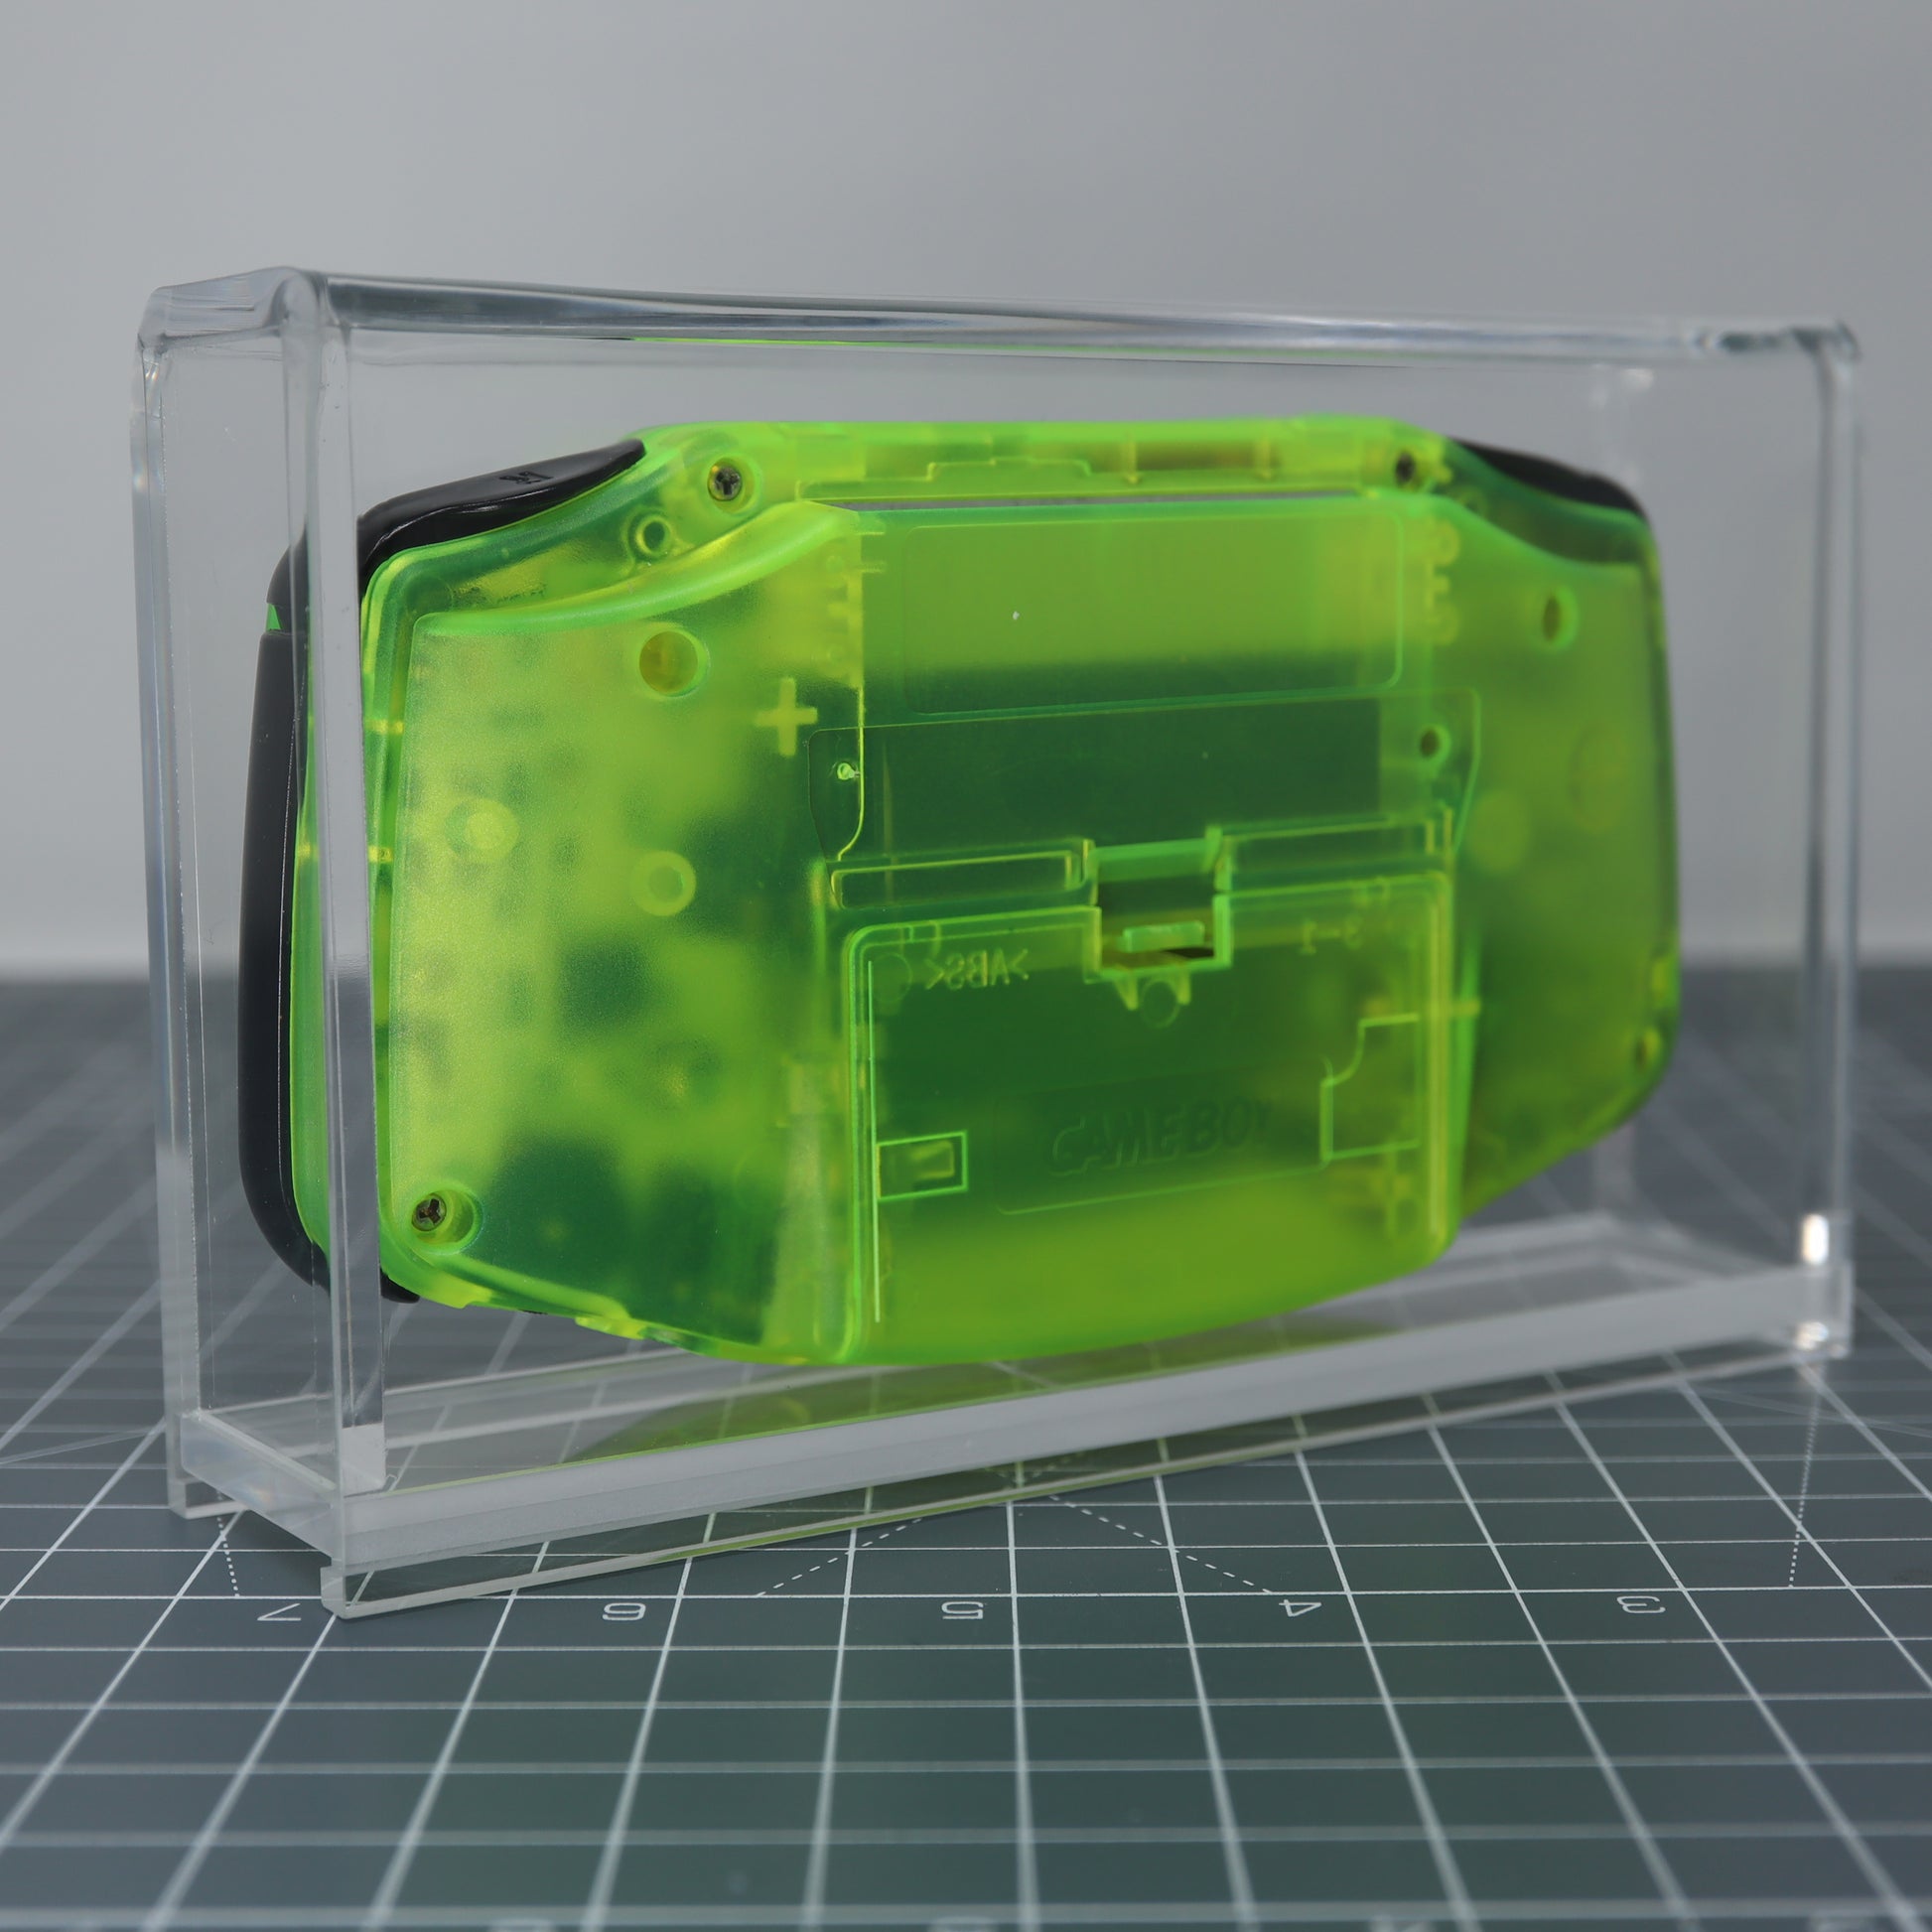 Game boy Advance console safely store inside custom acrylic display capsule rear image